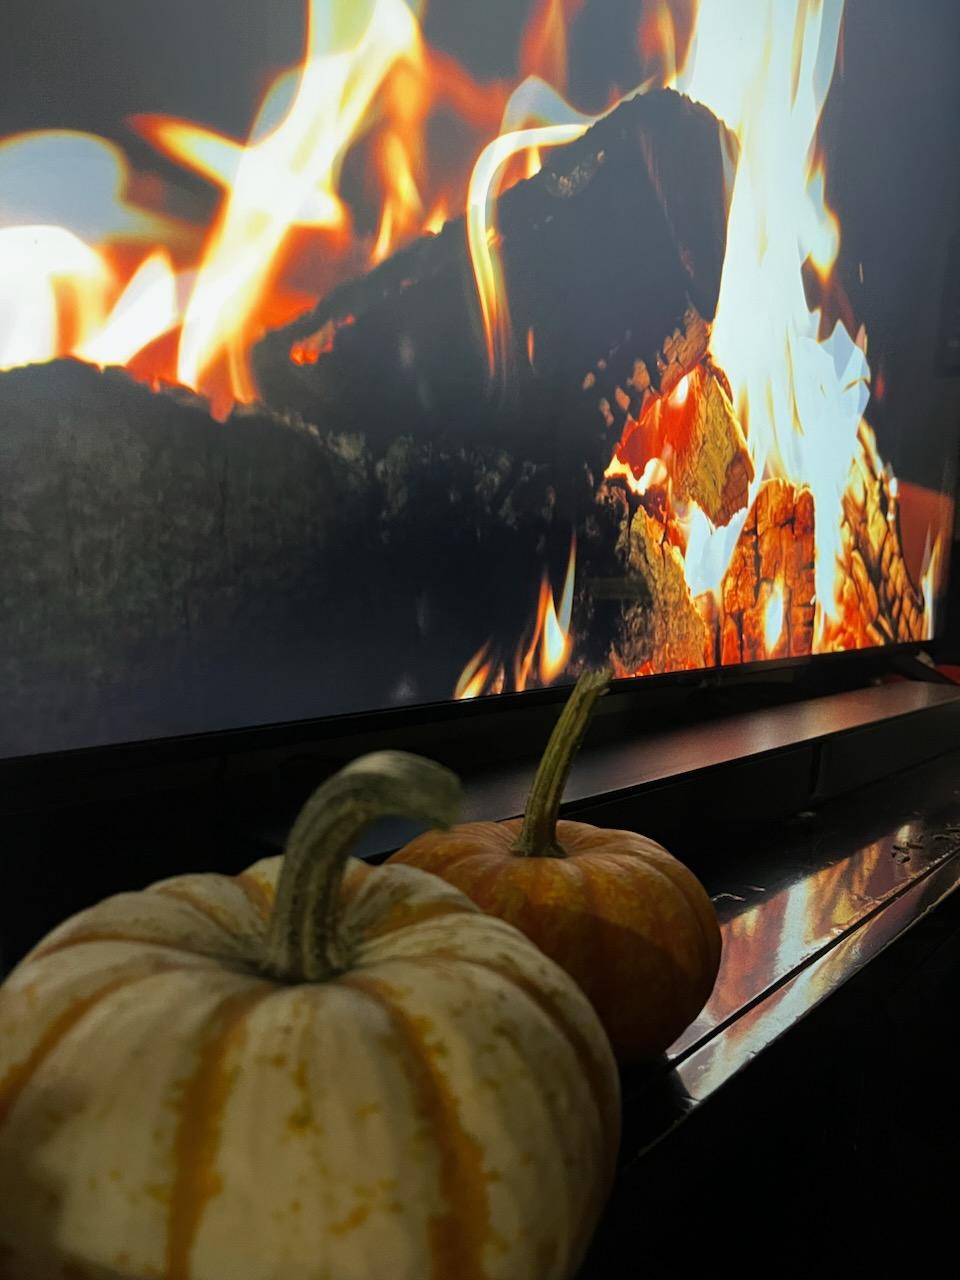 Fall pumpkins and a digital cozy fireplace, taken on 10/9/23